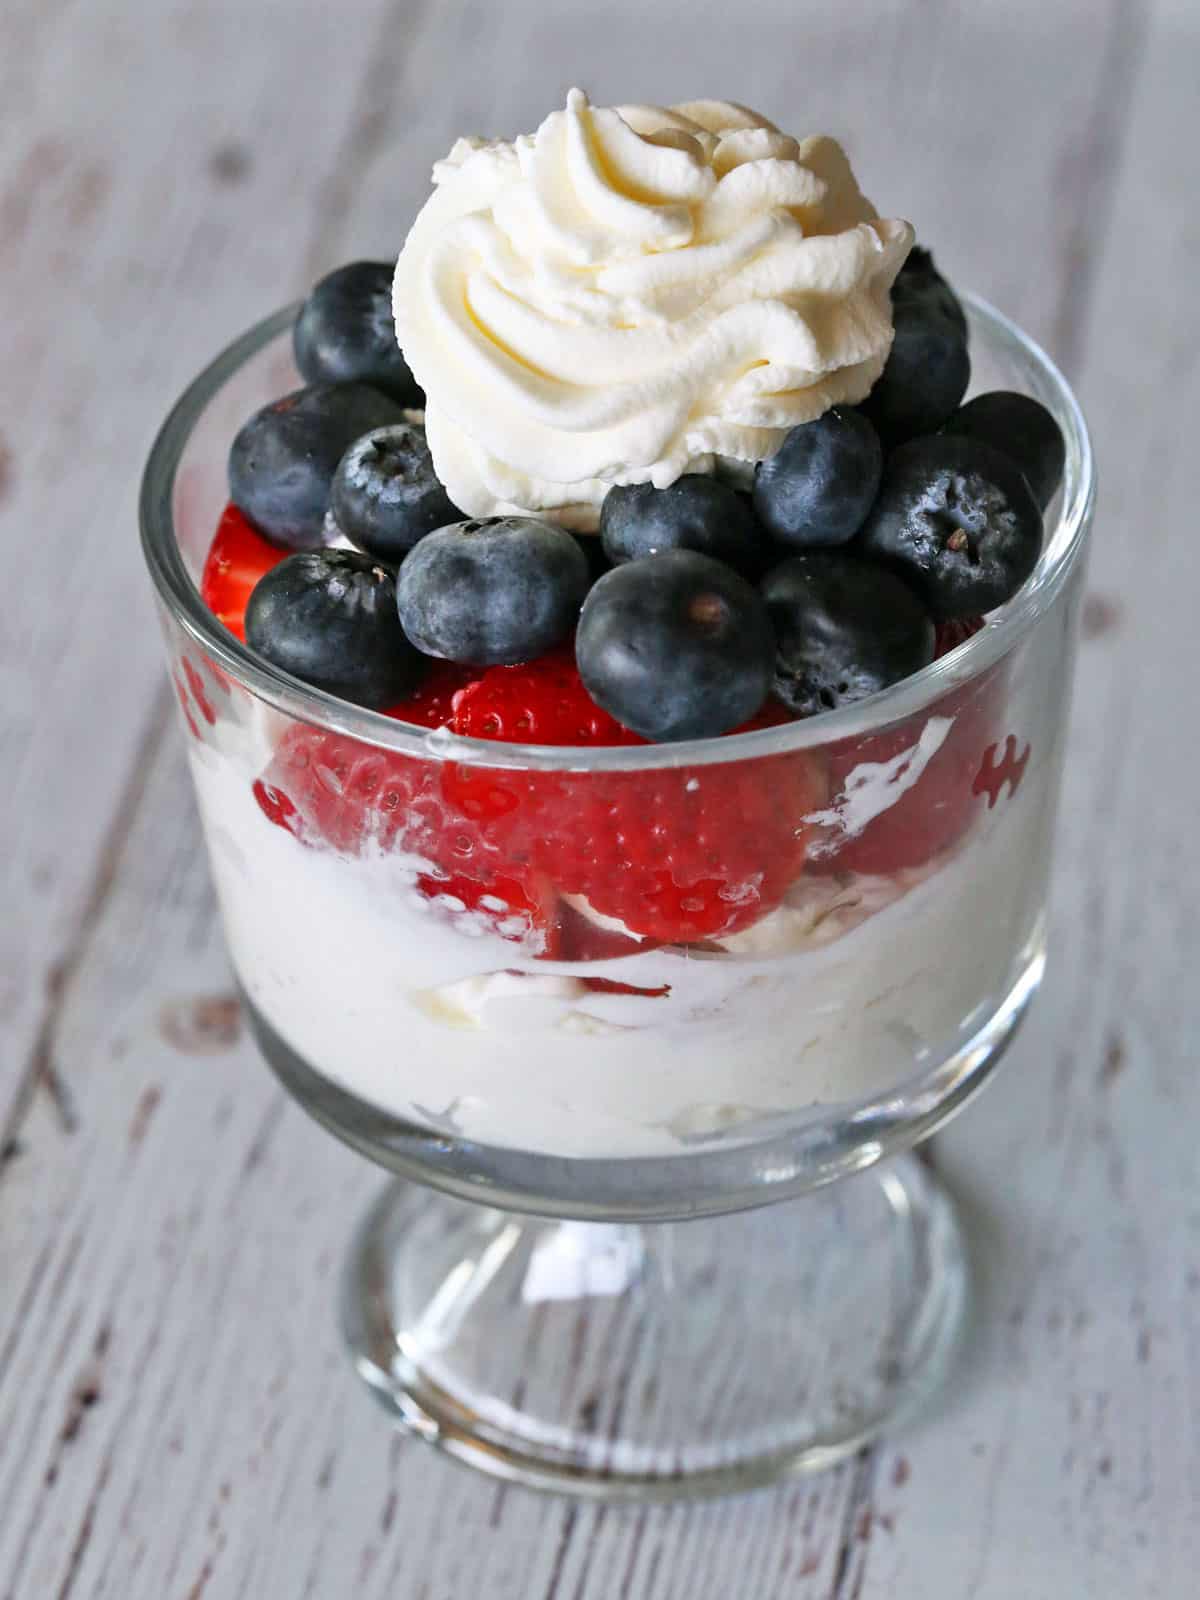 Keto whipped cream is served with berries.